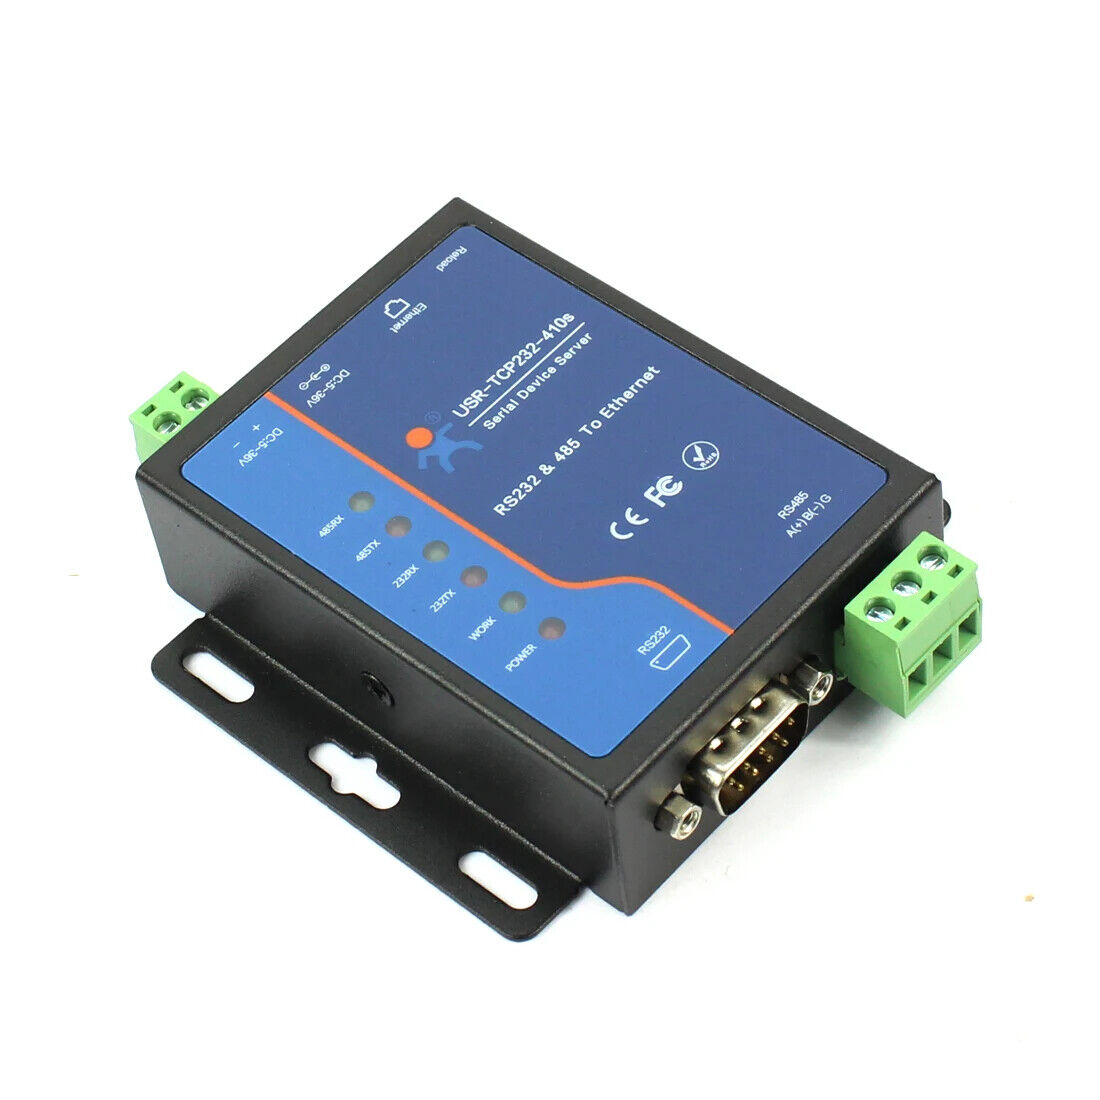 TCP TCP Serial USR-TCP232-410S to to Modbus Industrial Server RS485 Power IP